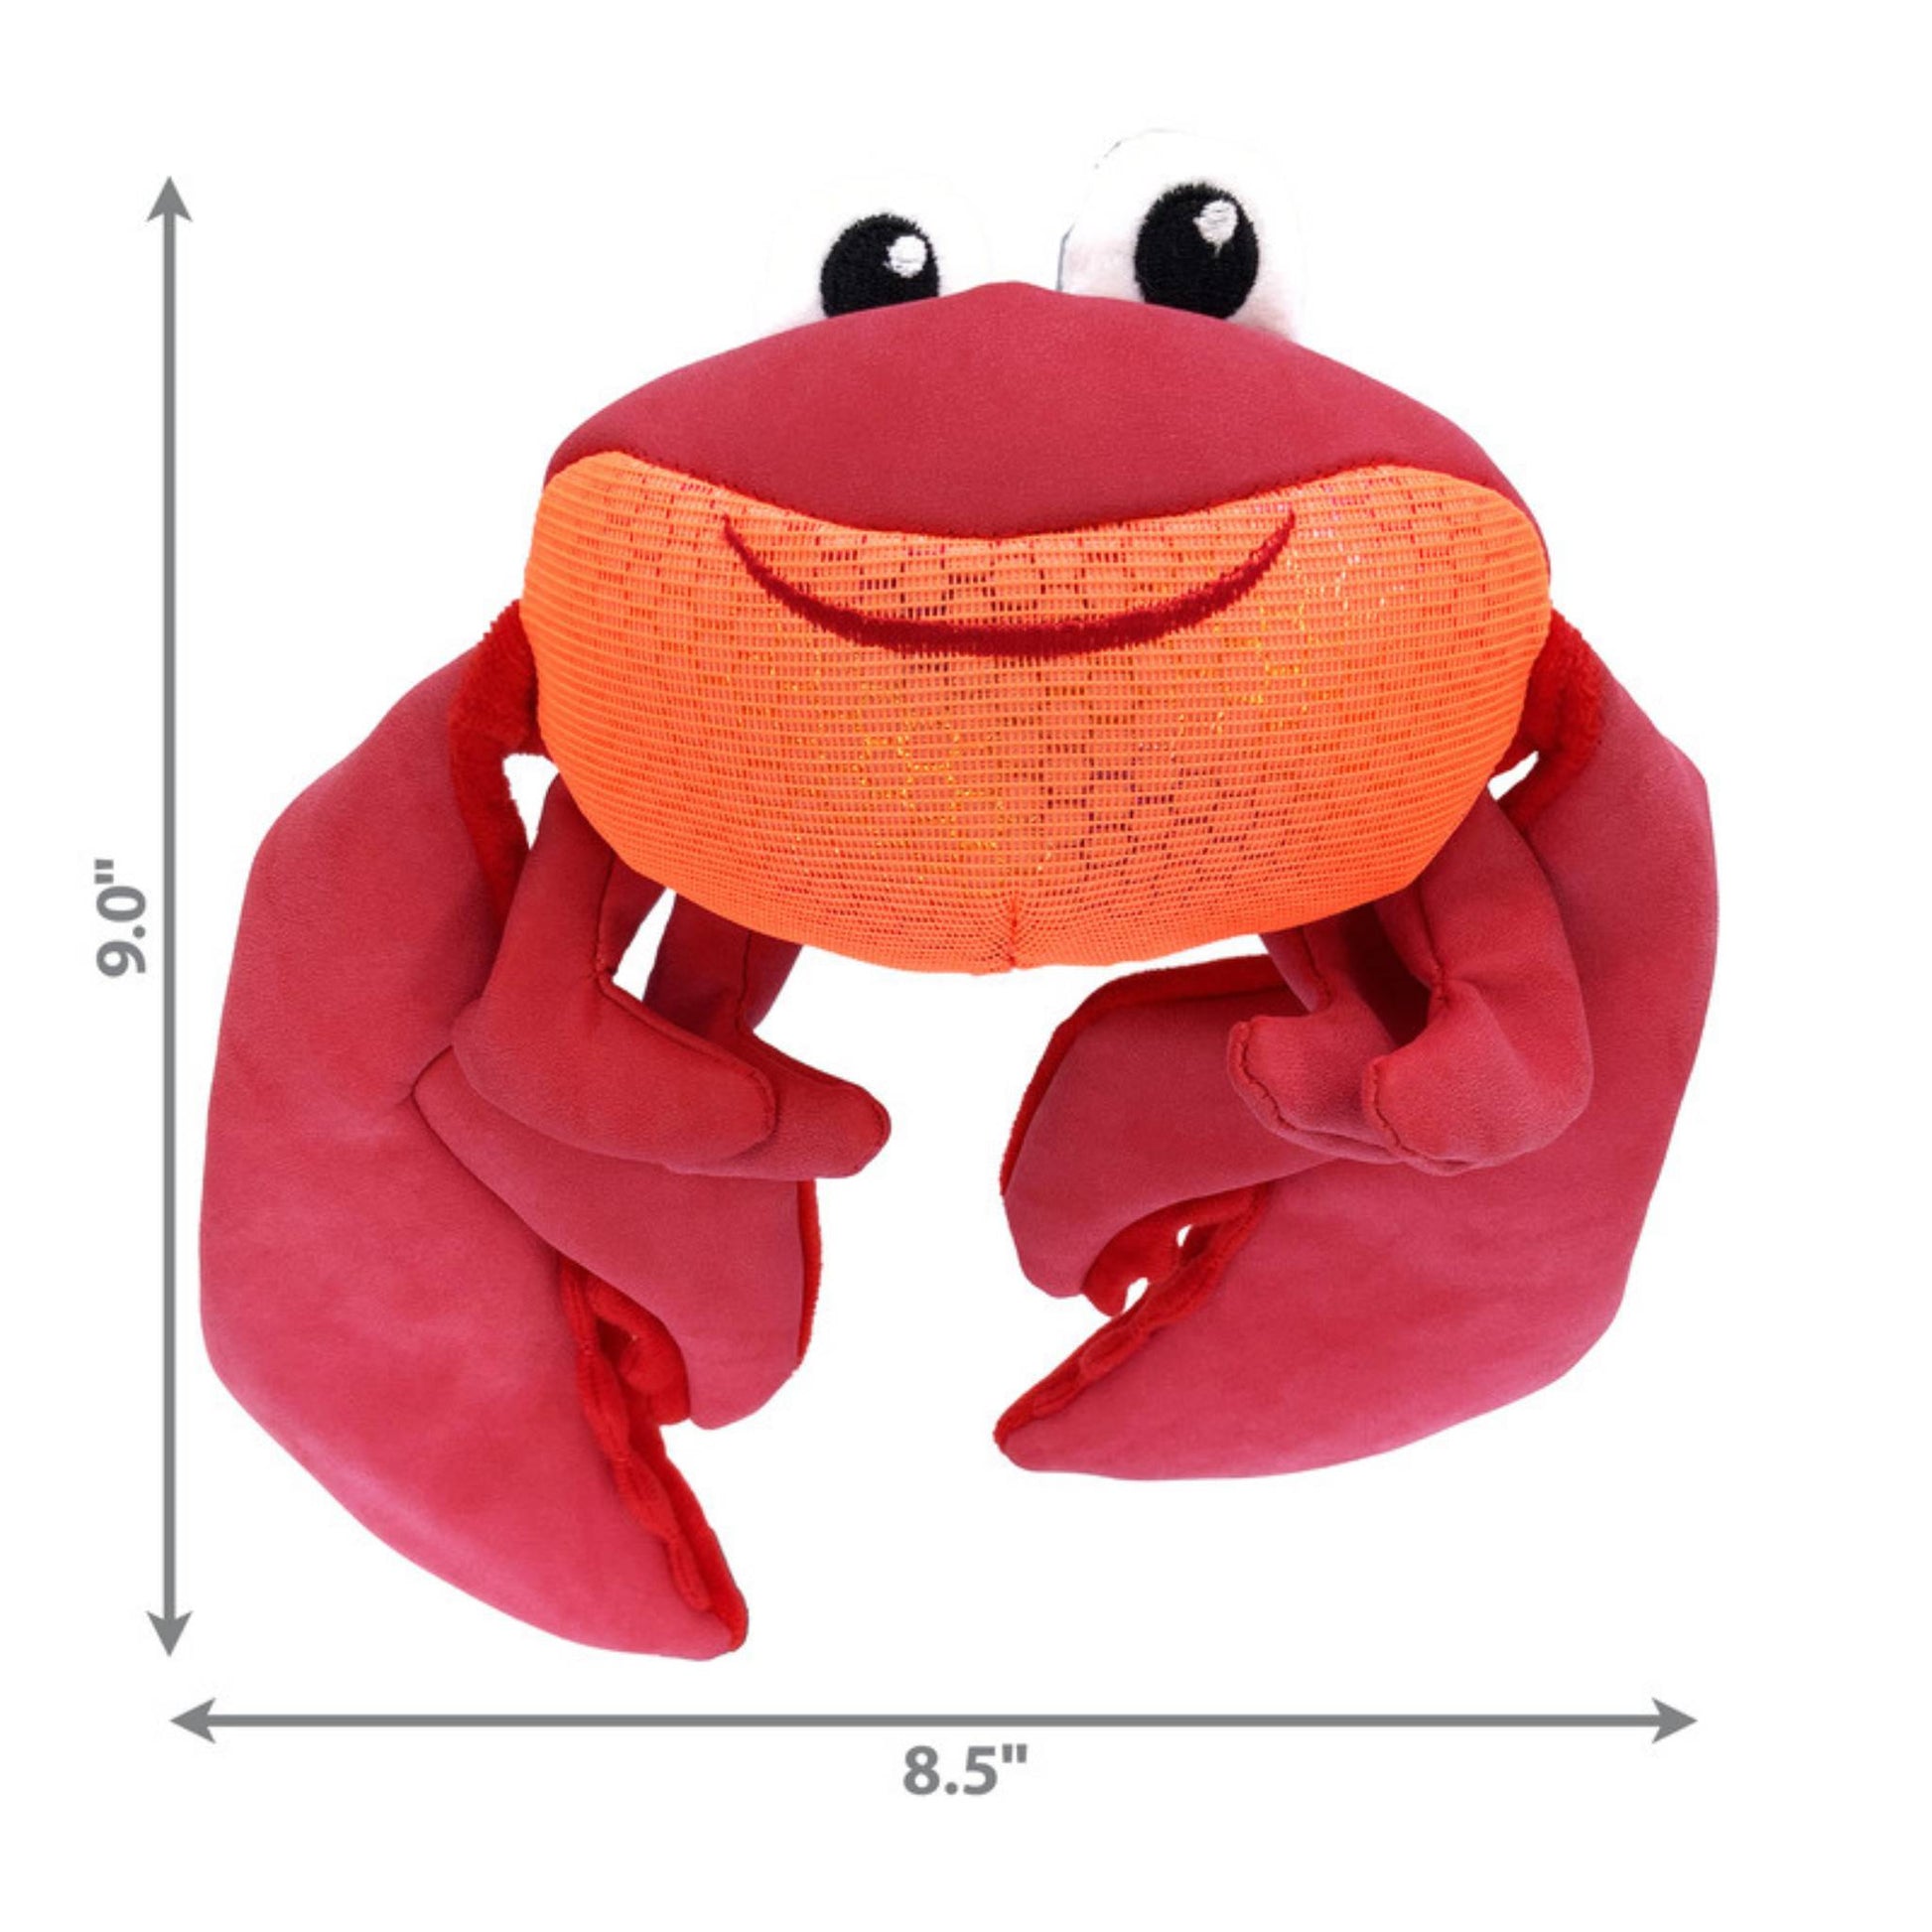 KONG shakers shimmy crab with dimensions